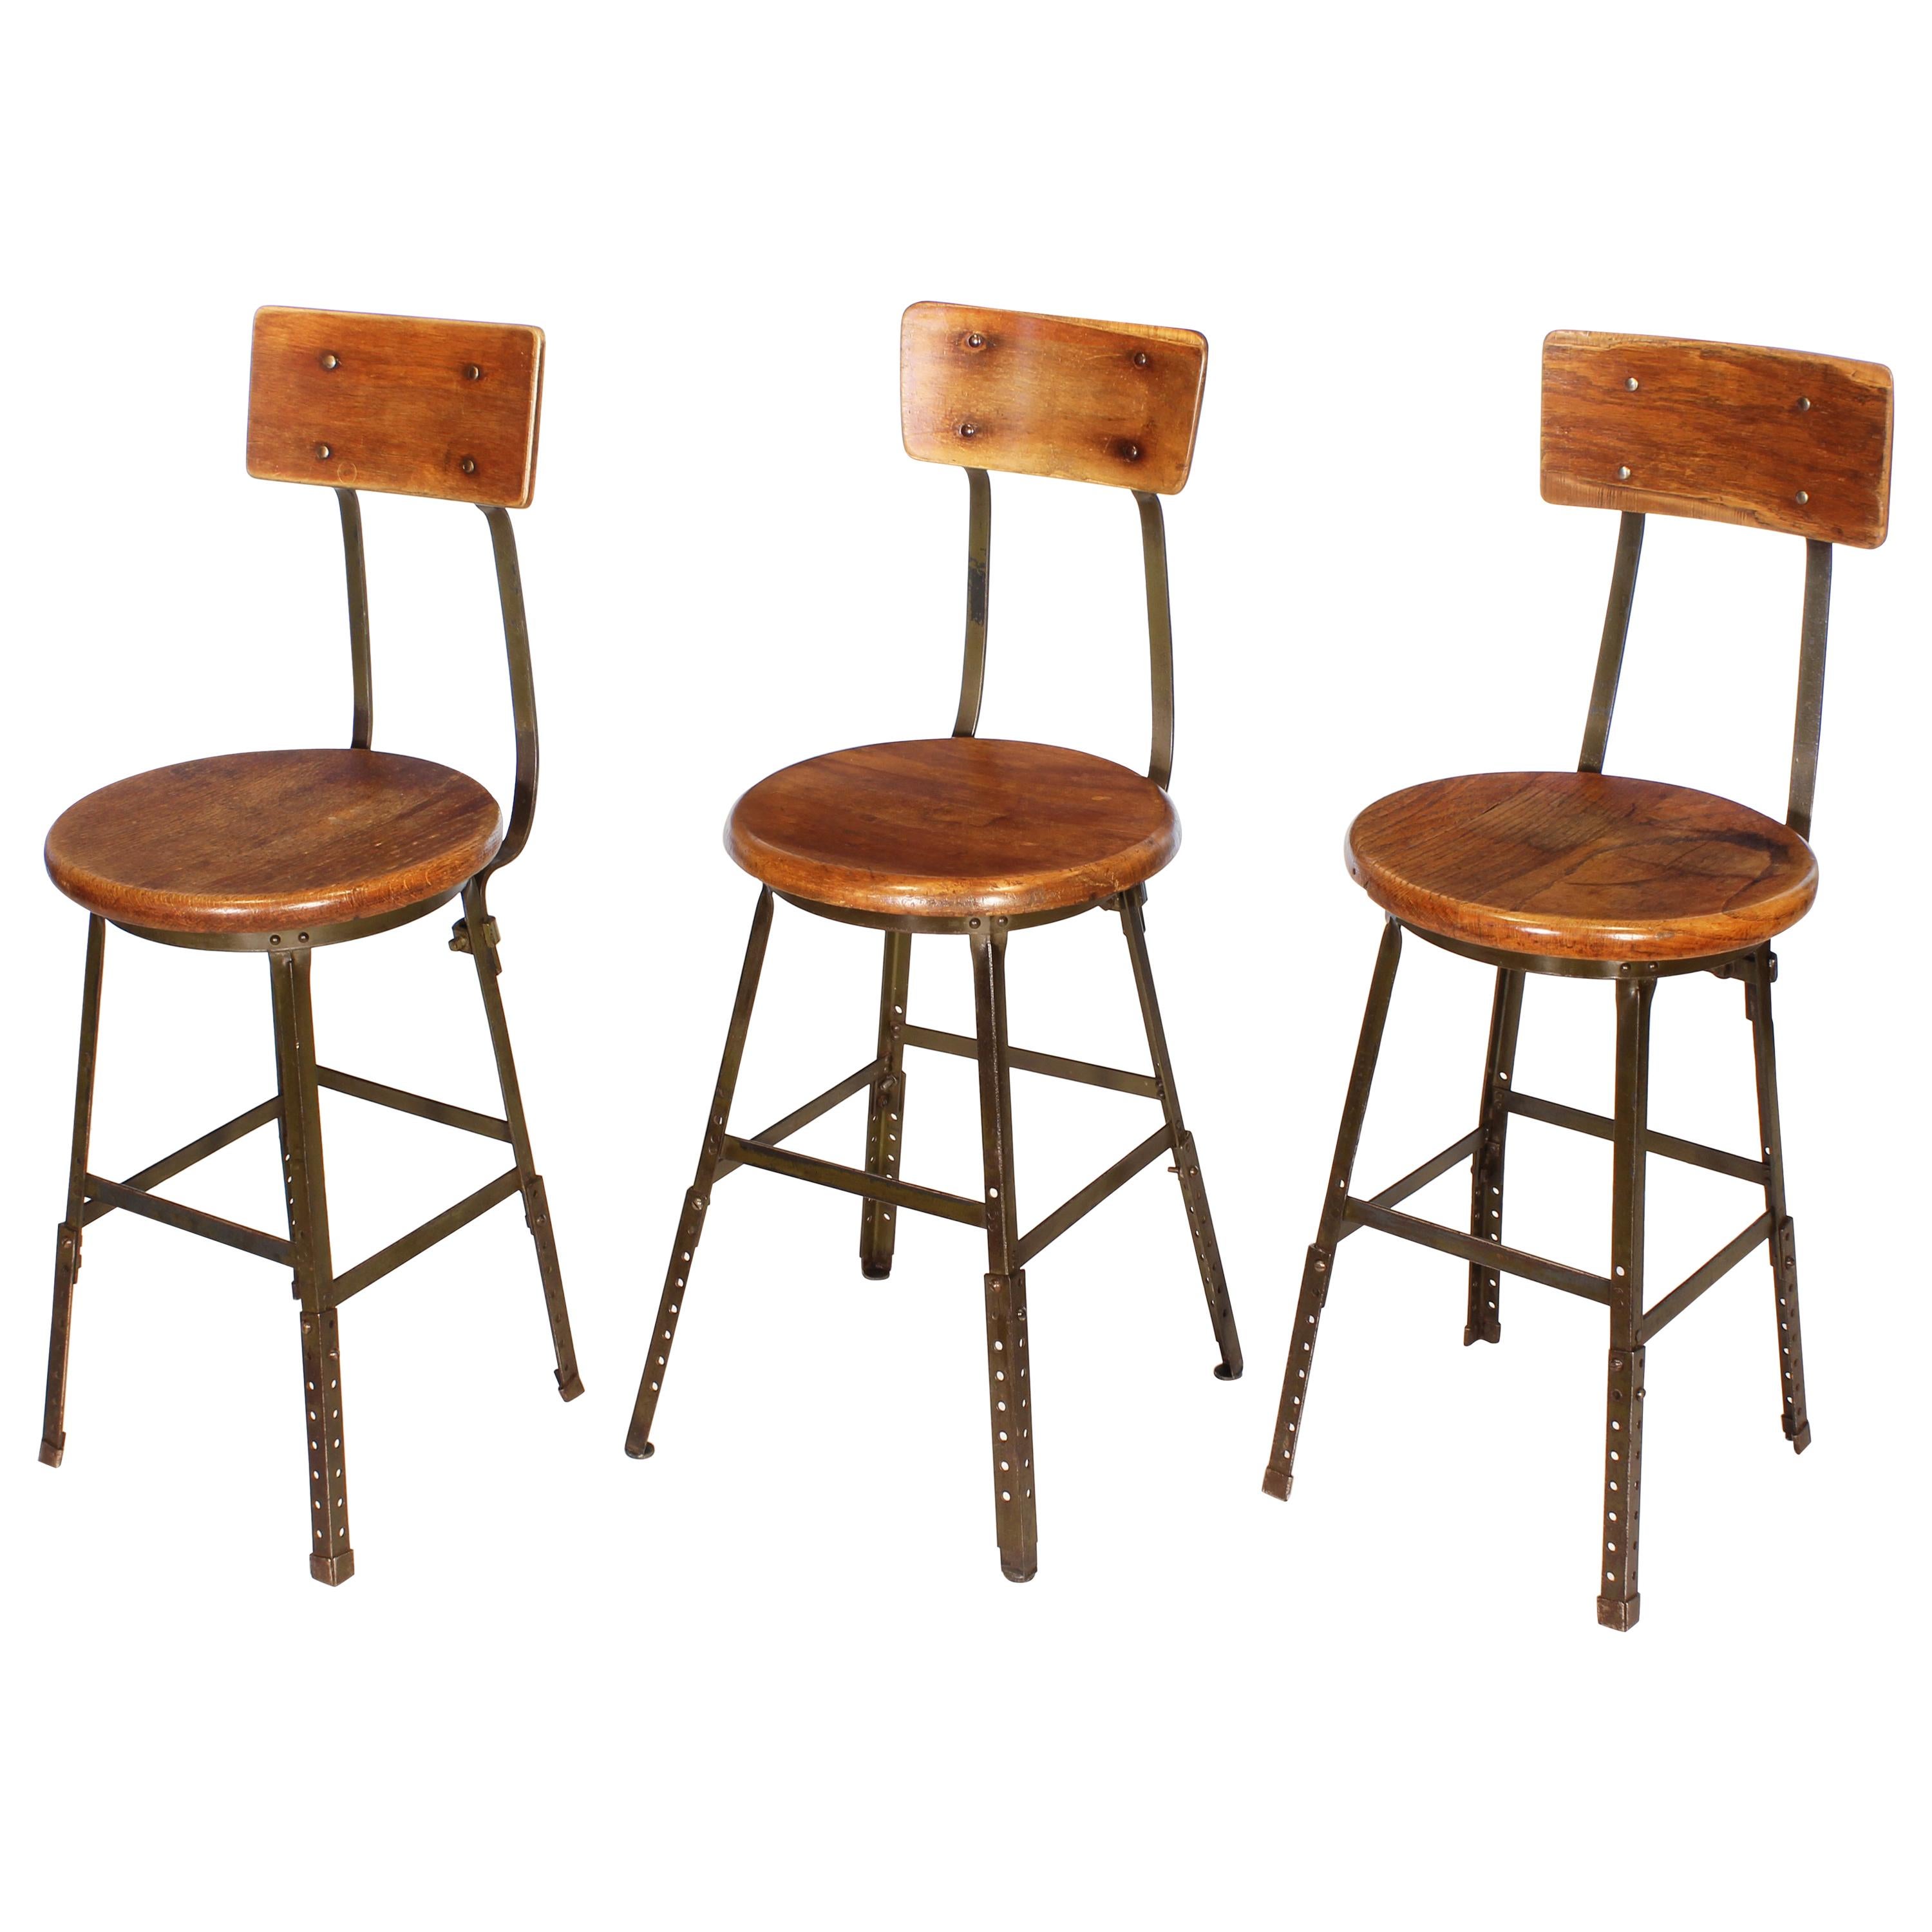 Set of 3 Authentic Vintage Industrial Factory Stools